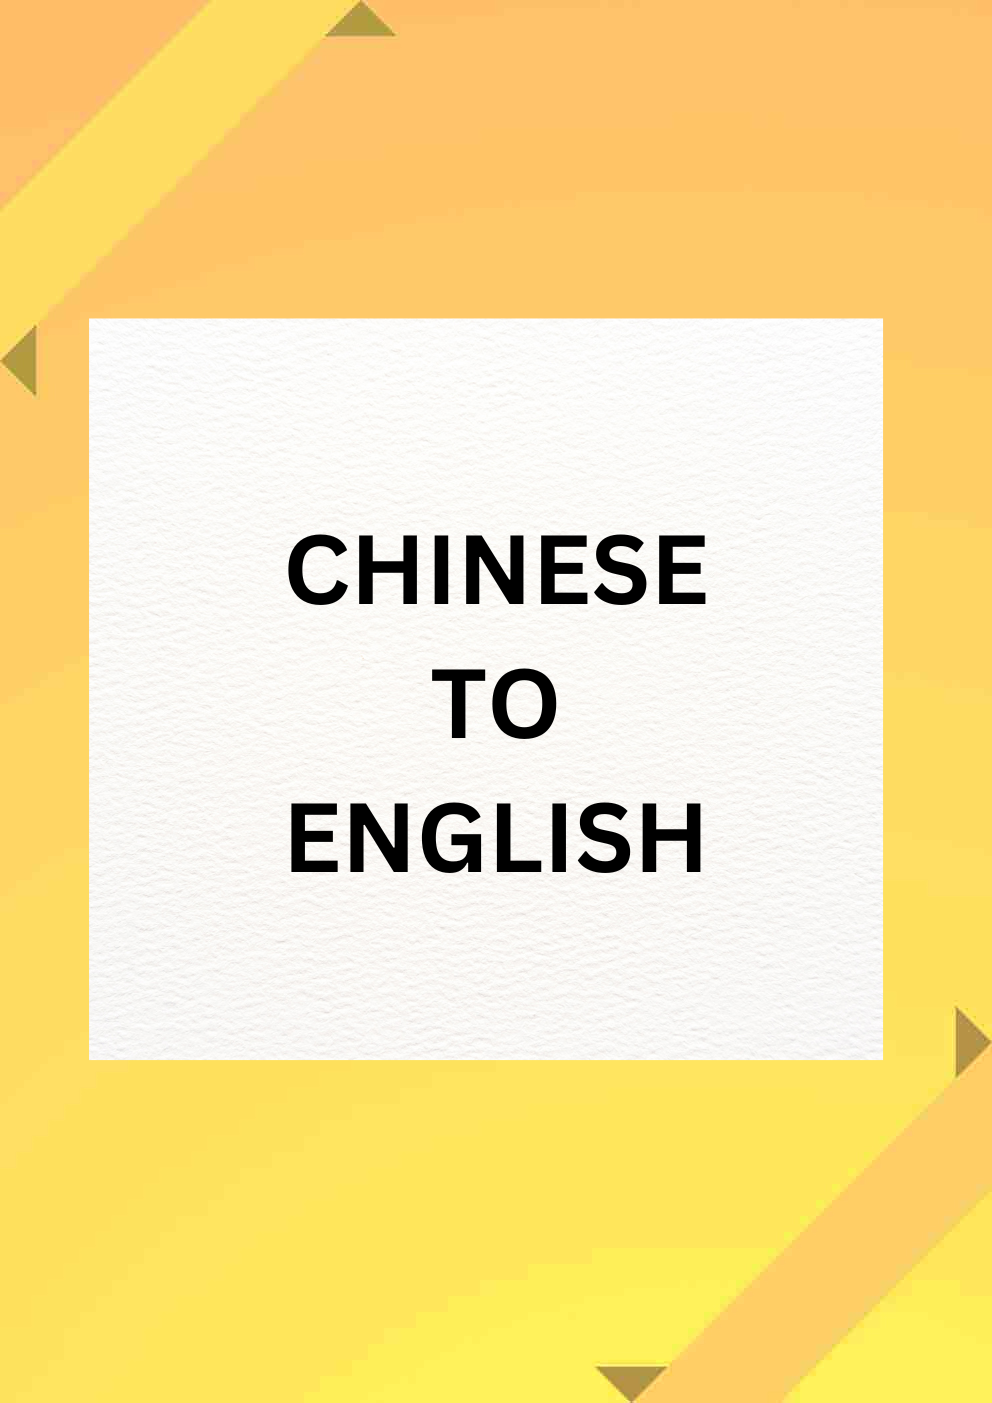 Document translation chinese to english [Birth Marriage Degree]